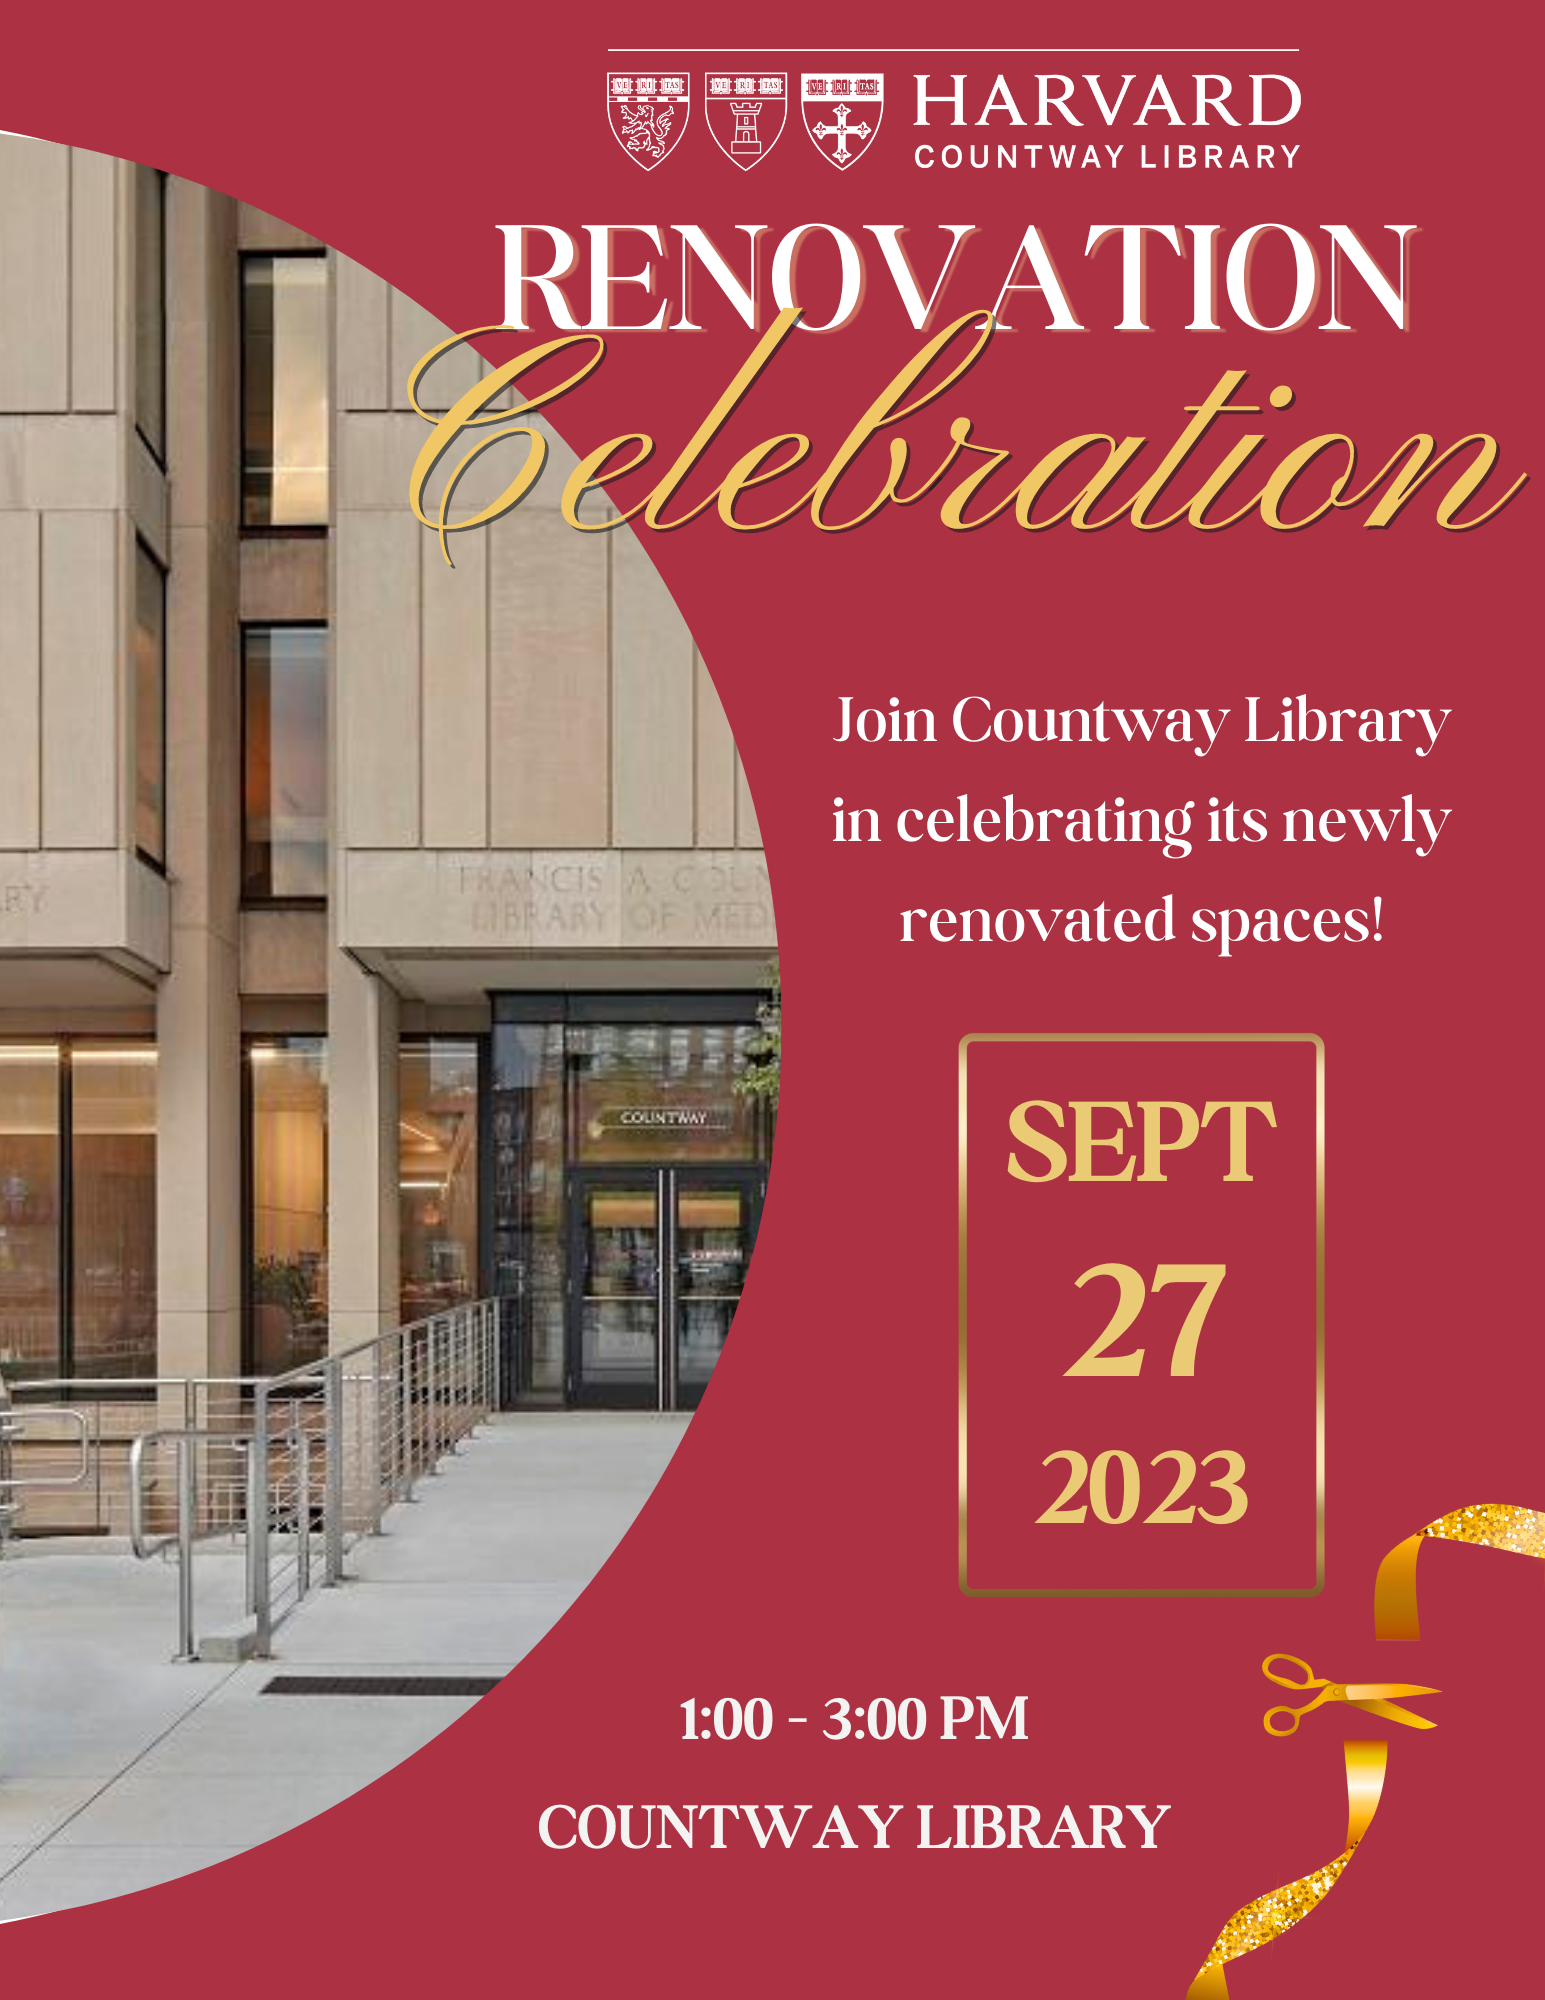 Harvard Countway Library Renovation Celebration. Join Countway Library in celebrating its newly renovated spaces on September 27, 2023 from 1:00 to 3:00 PM at Countway Library.